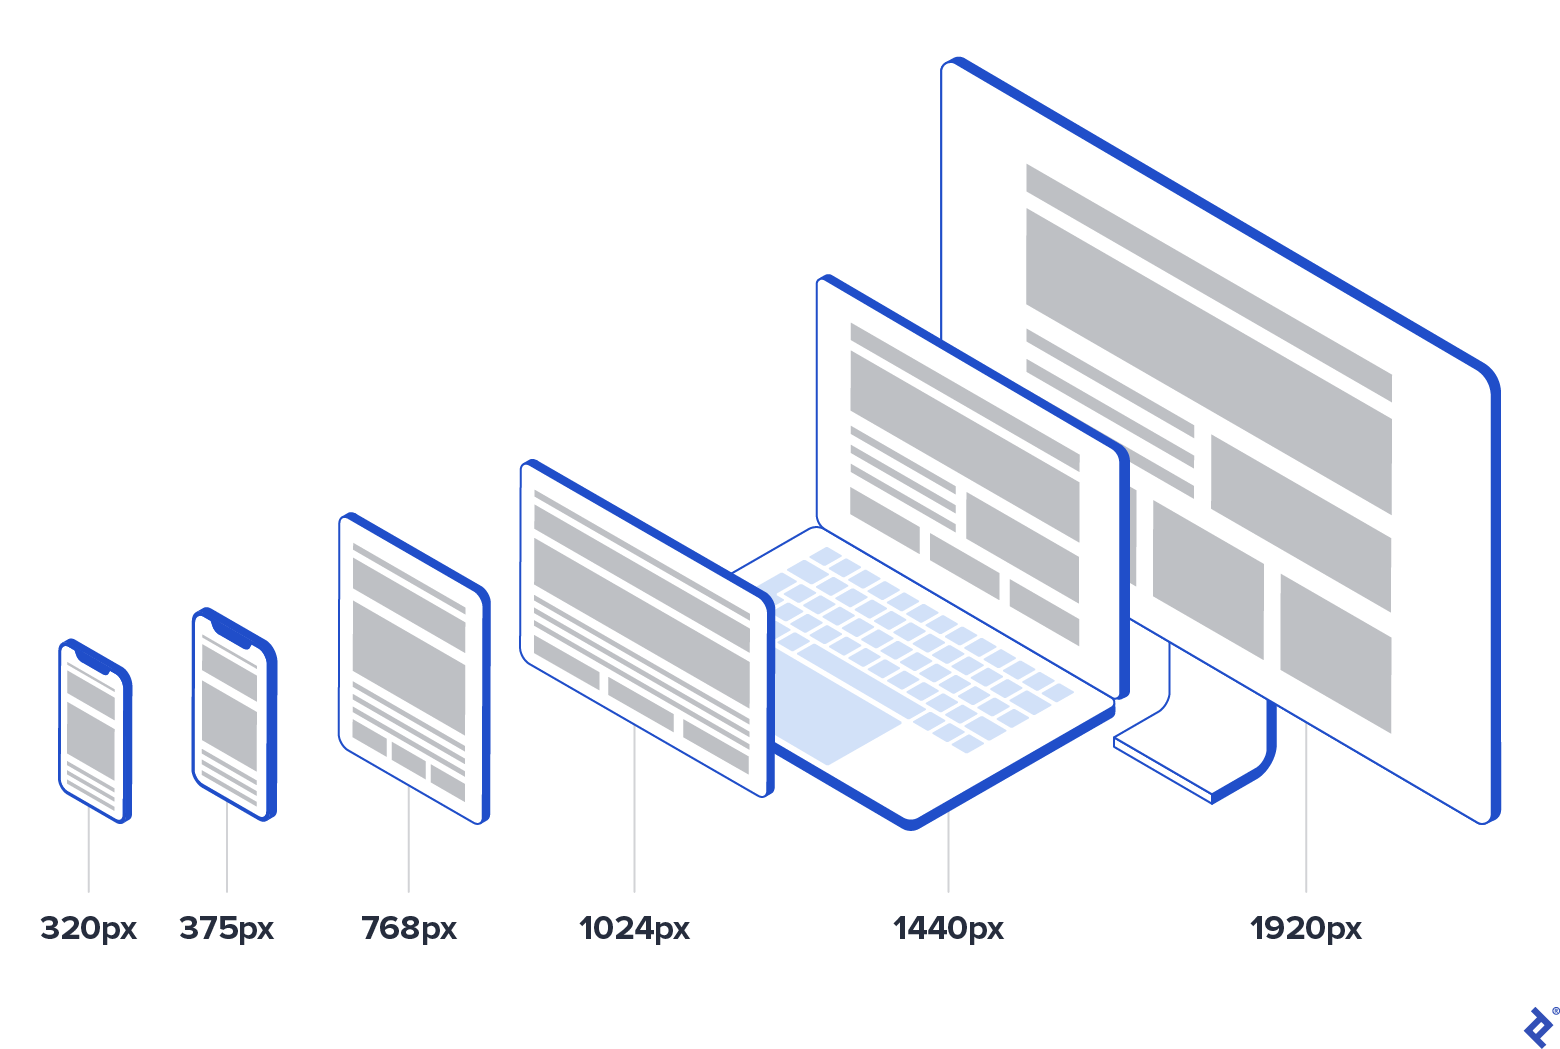 Six different screen sizes—from 320px to 1920px—are shown.